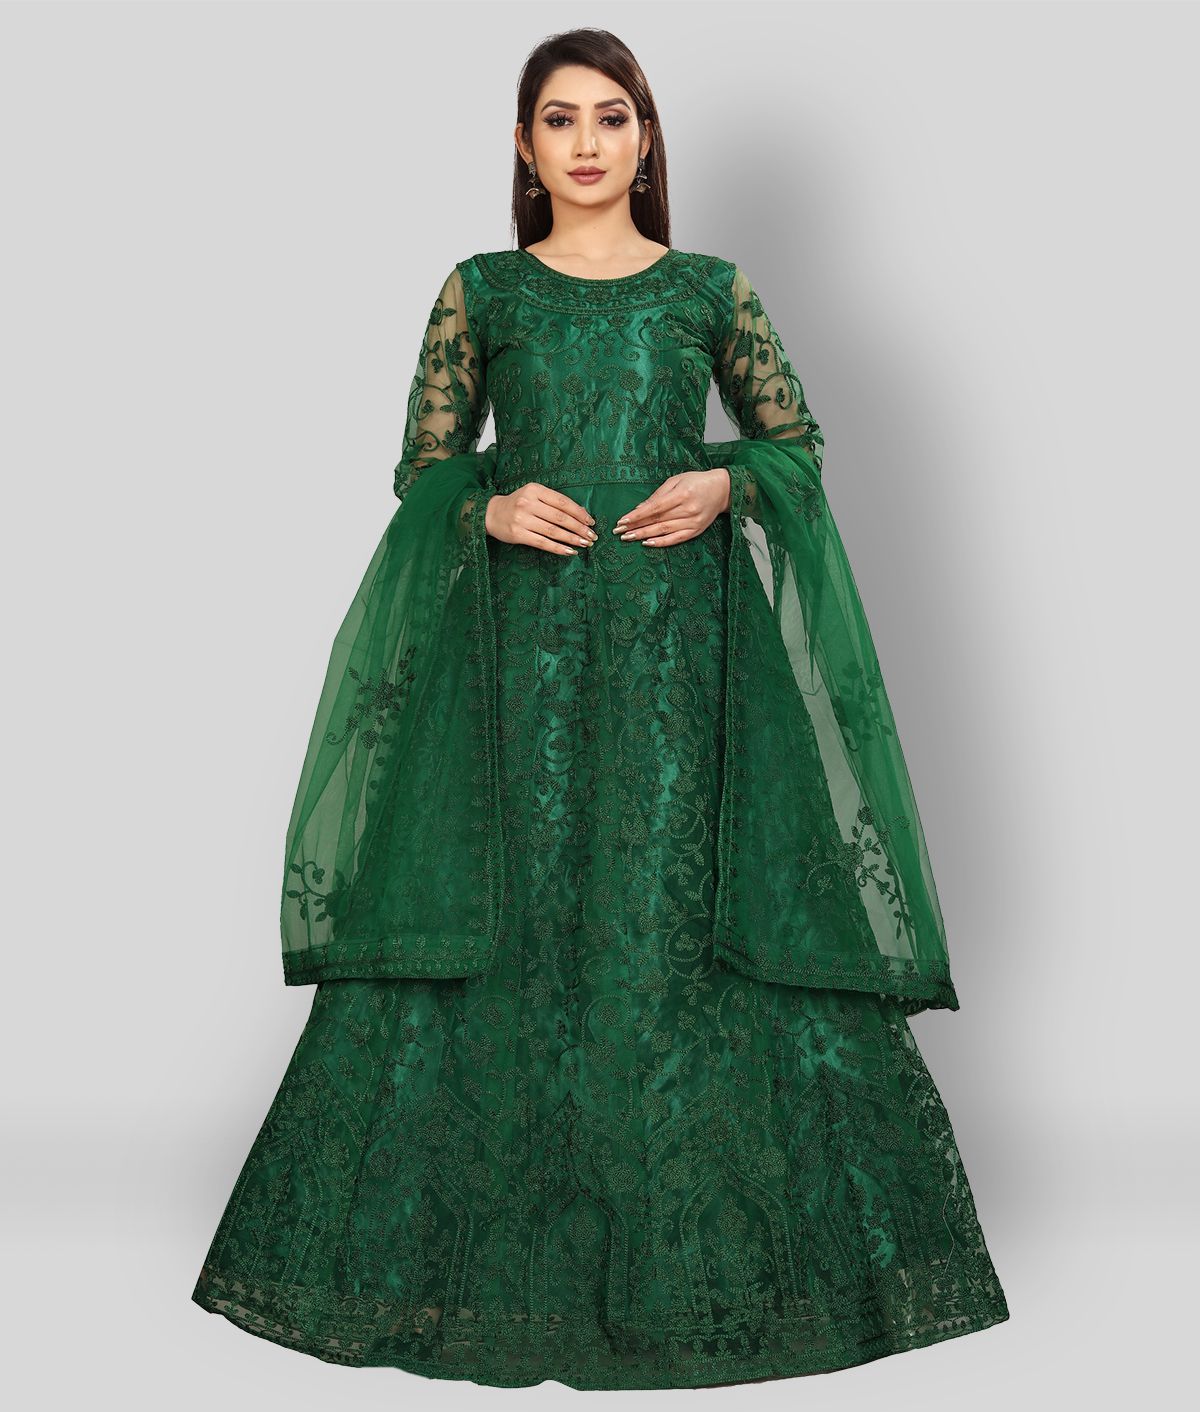     			Aika - Green Anarkali Net Women's Semi Stitched Ethnic Gown ( Pack of 1 )